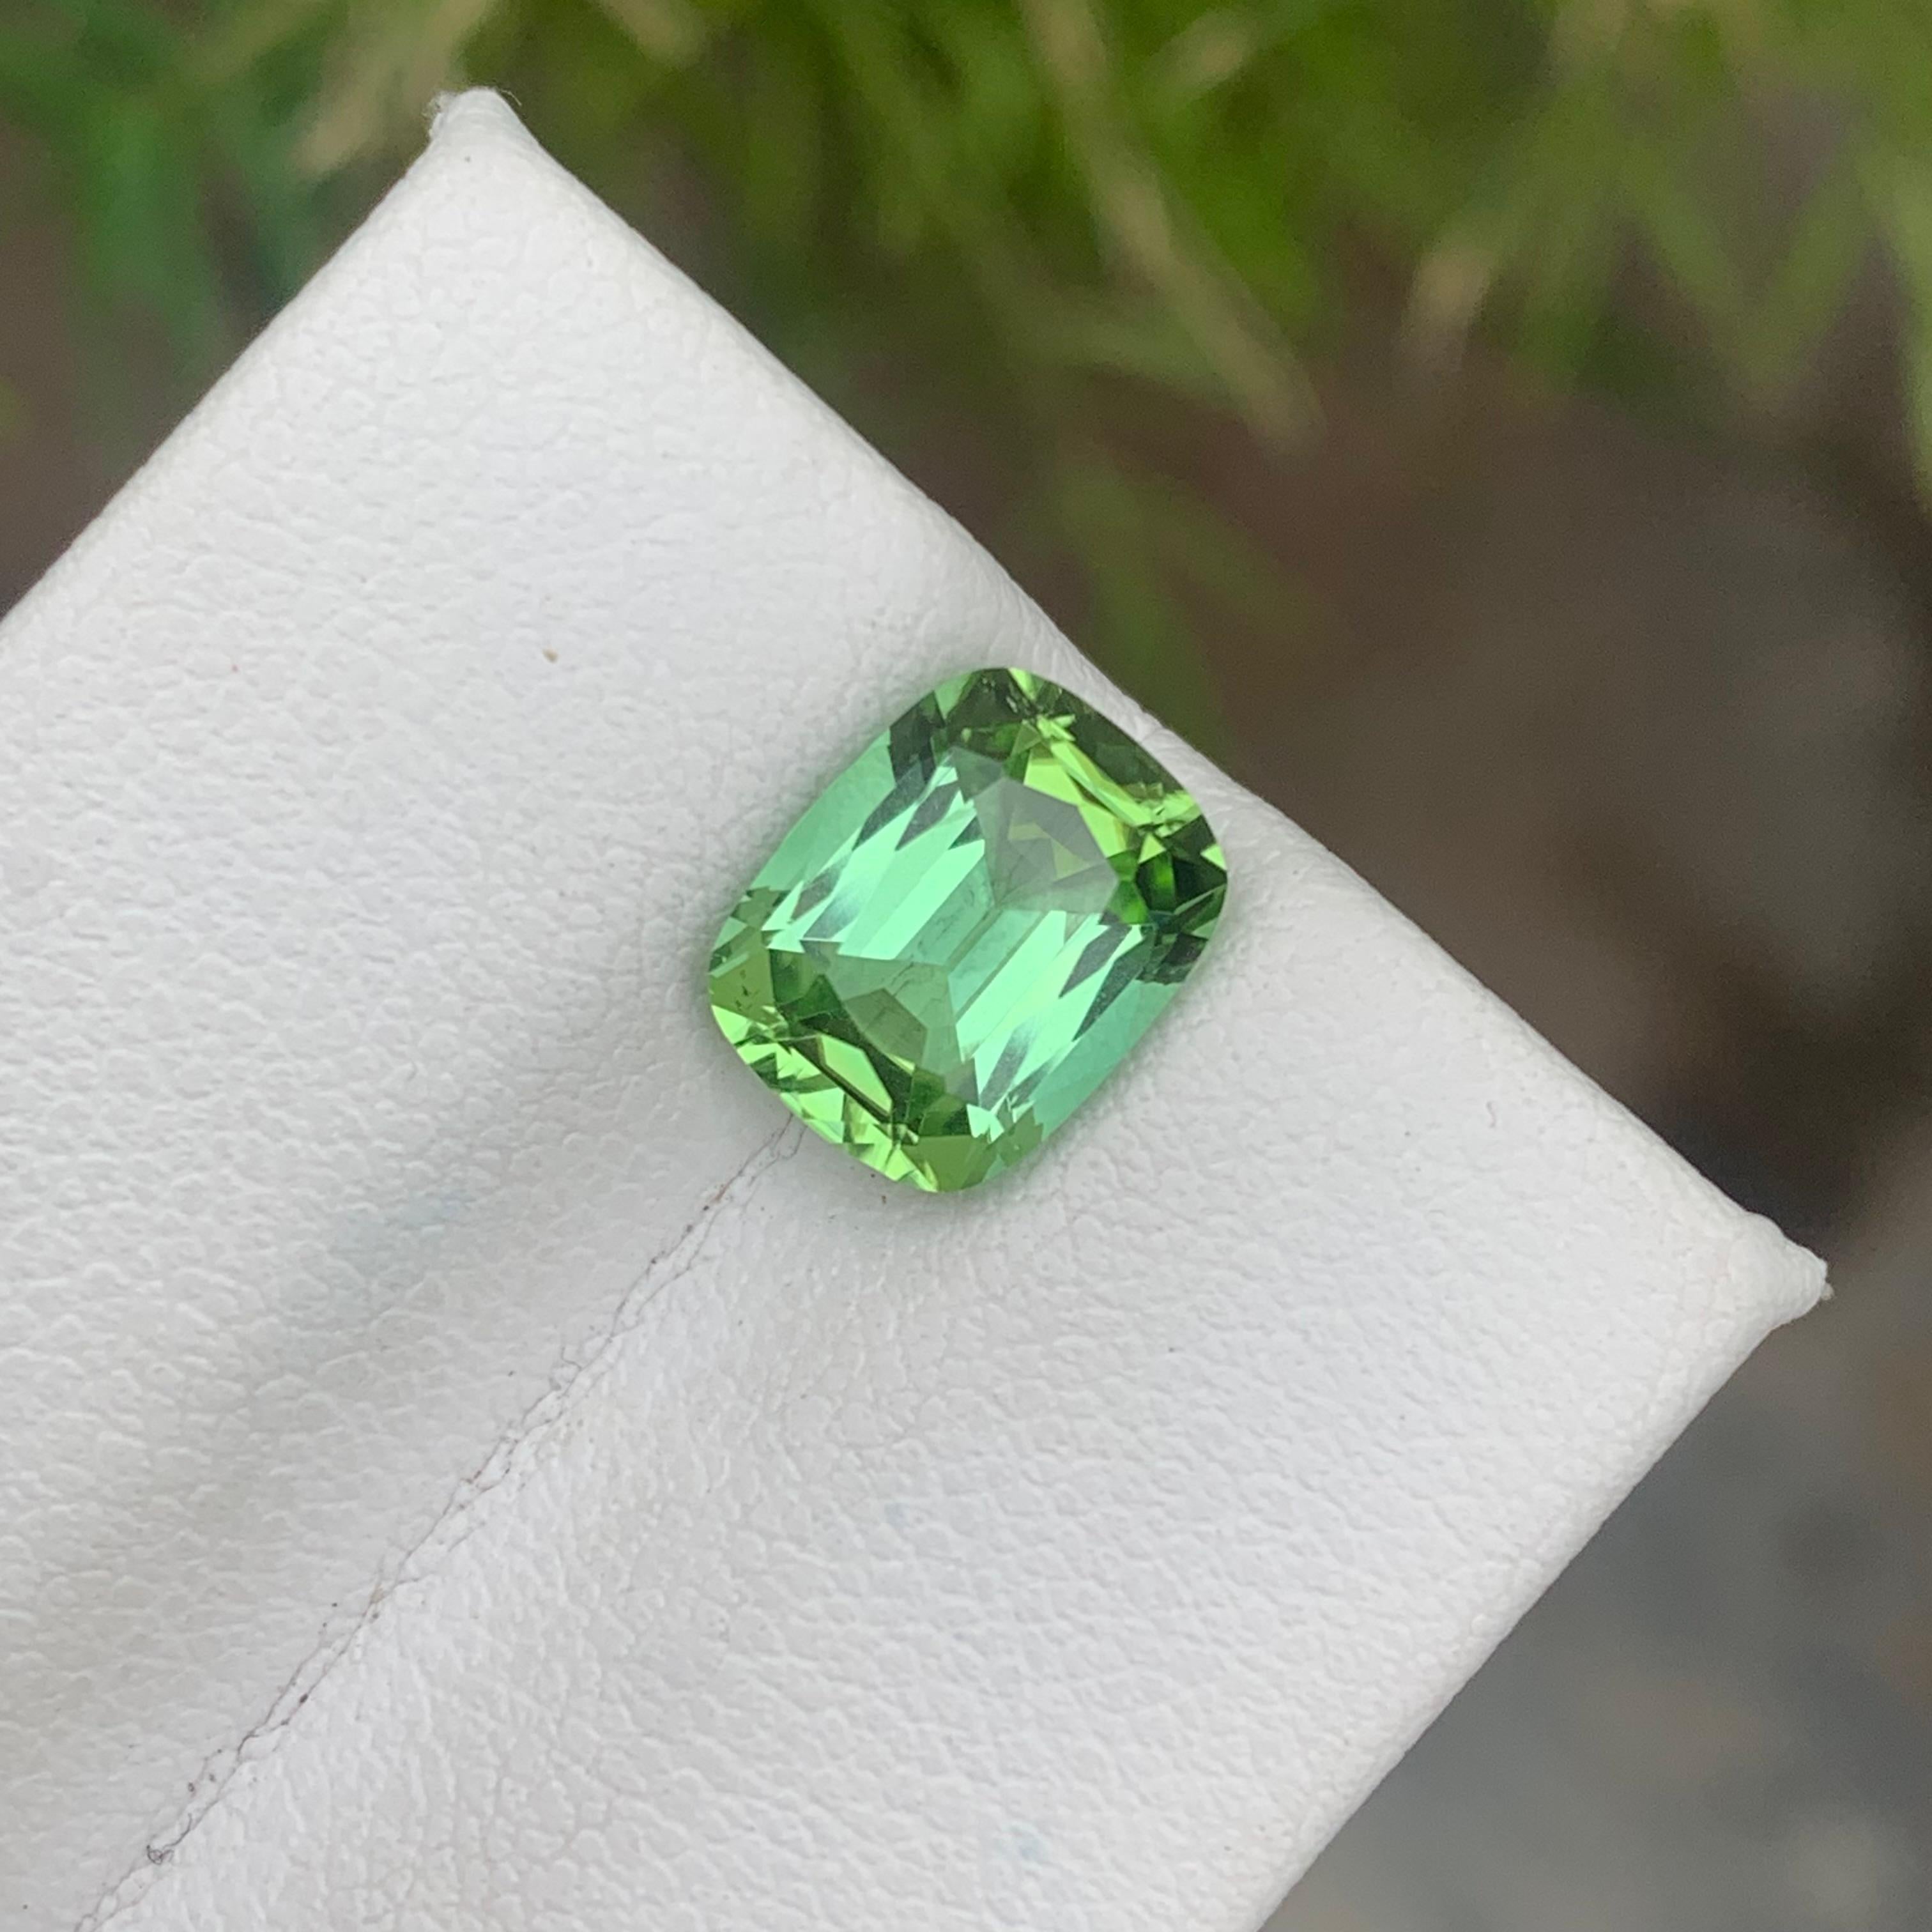 Stunning 2.65 Carat Natural Loose Tourmaline Ring Cushion Cut From Afghanistan For Sale 5